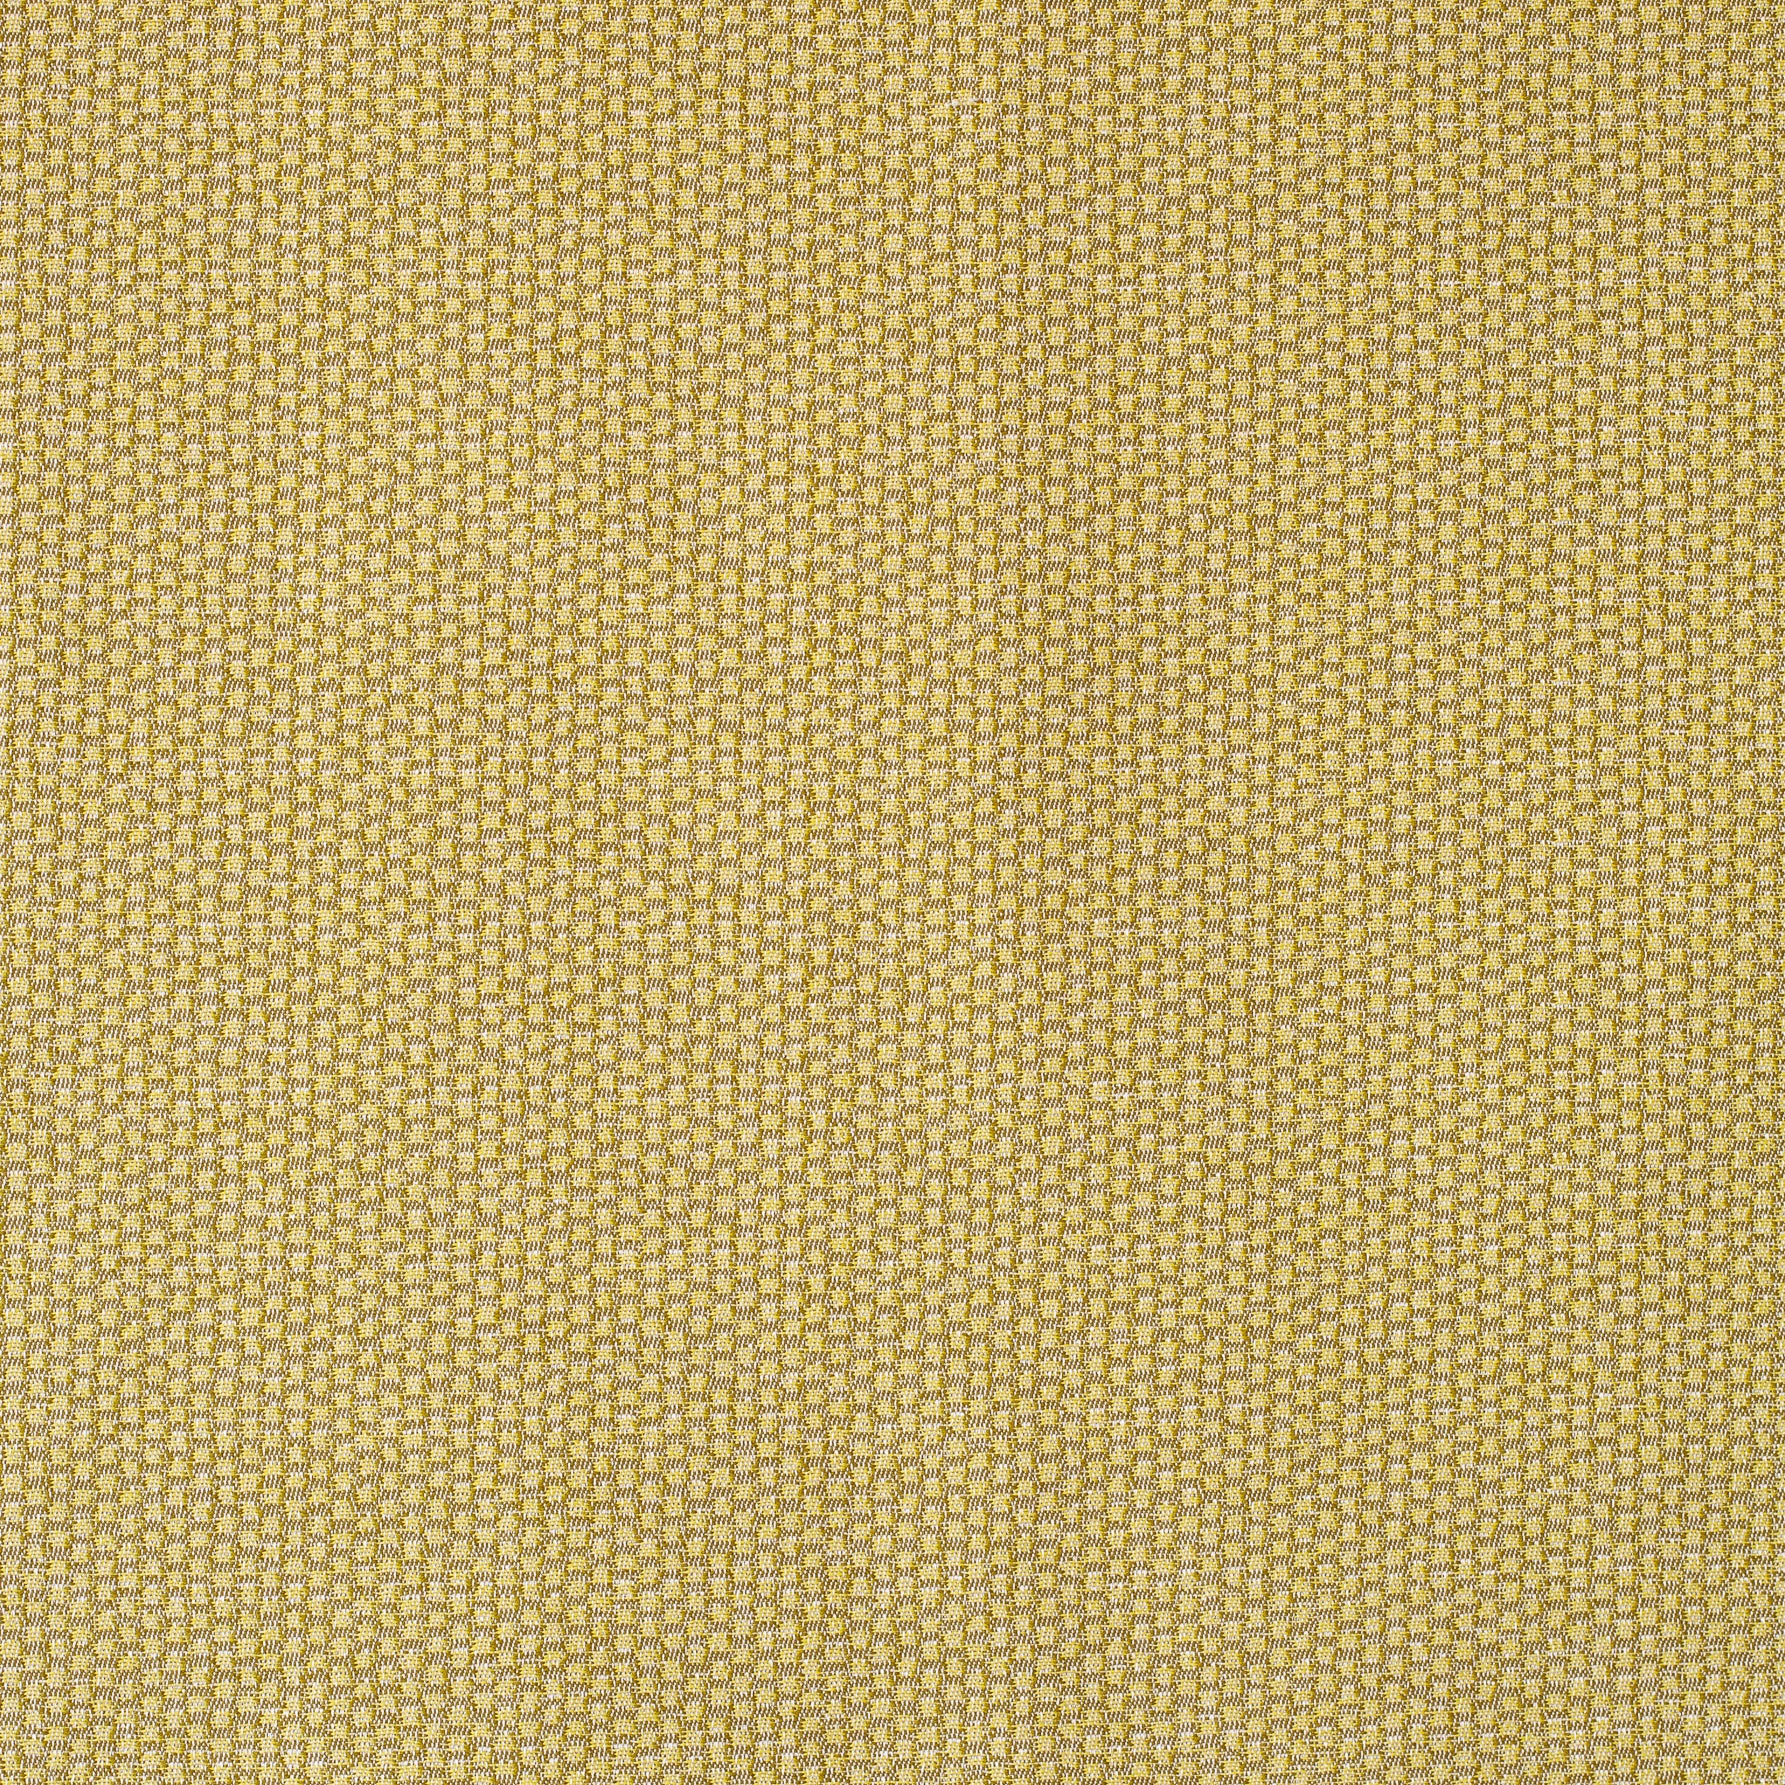 Detail of fabric in a dense checked weave in gold and tan.